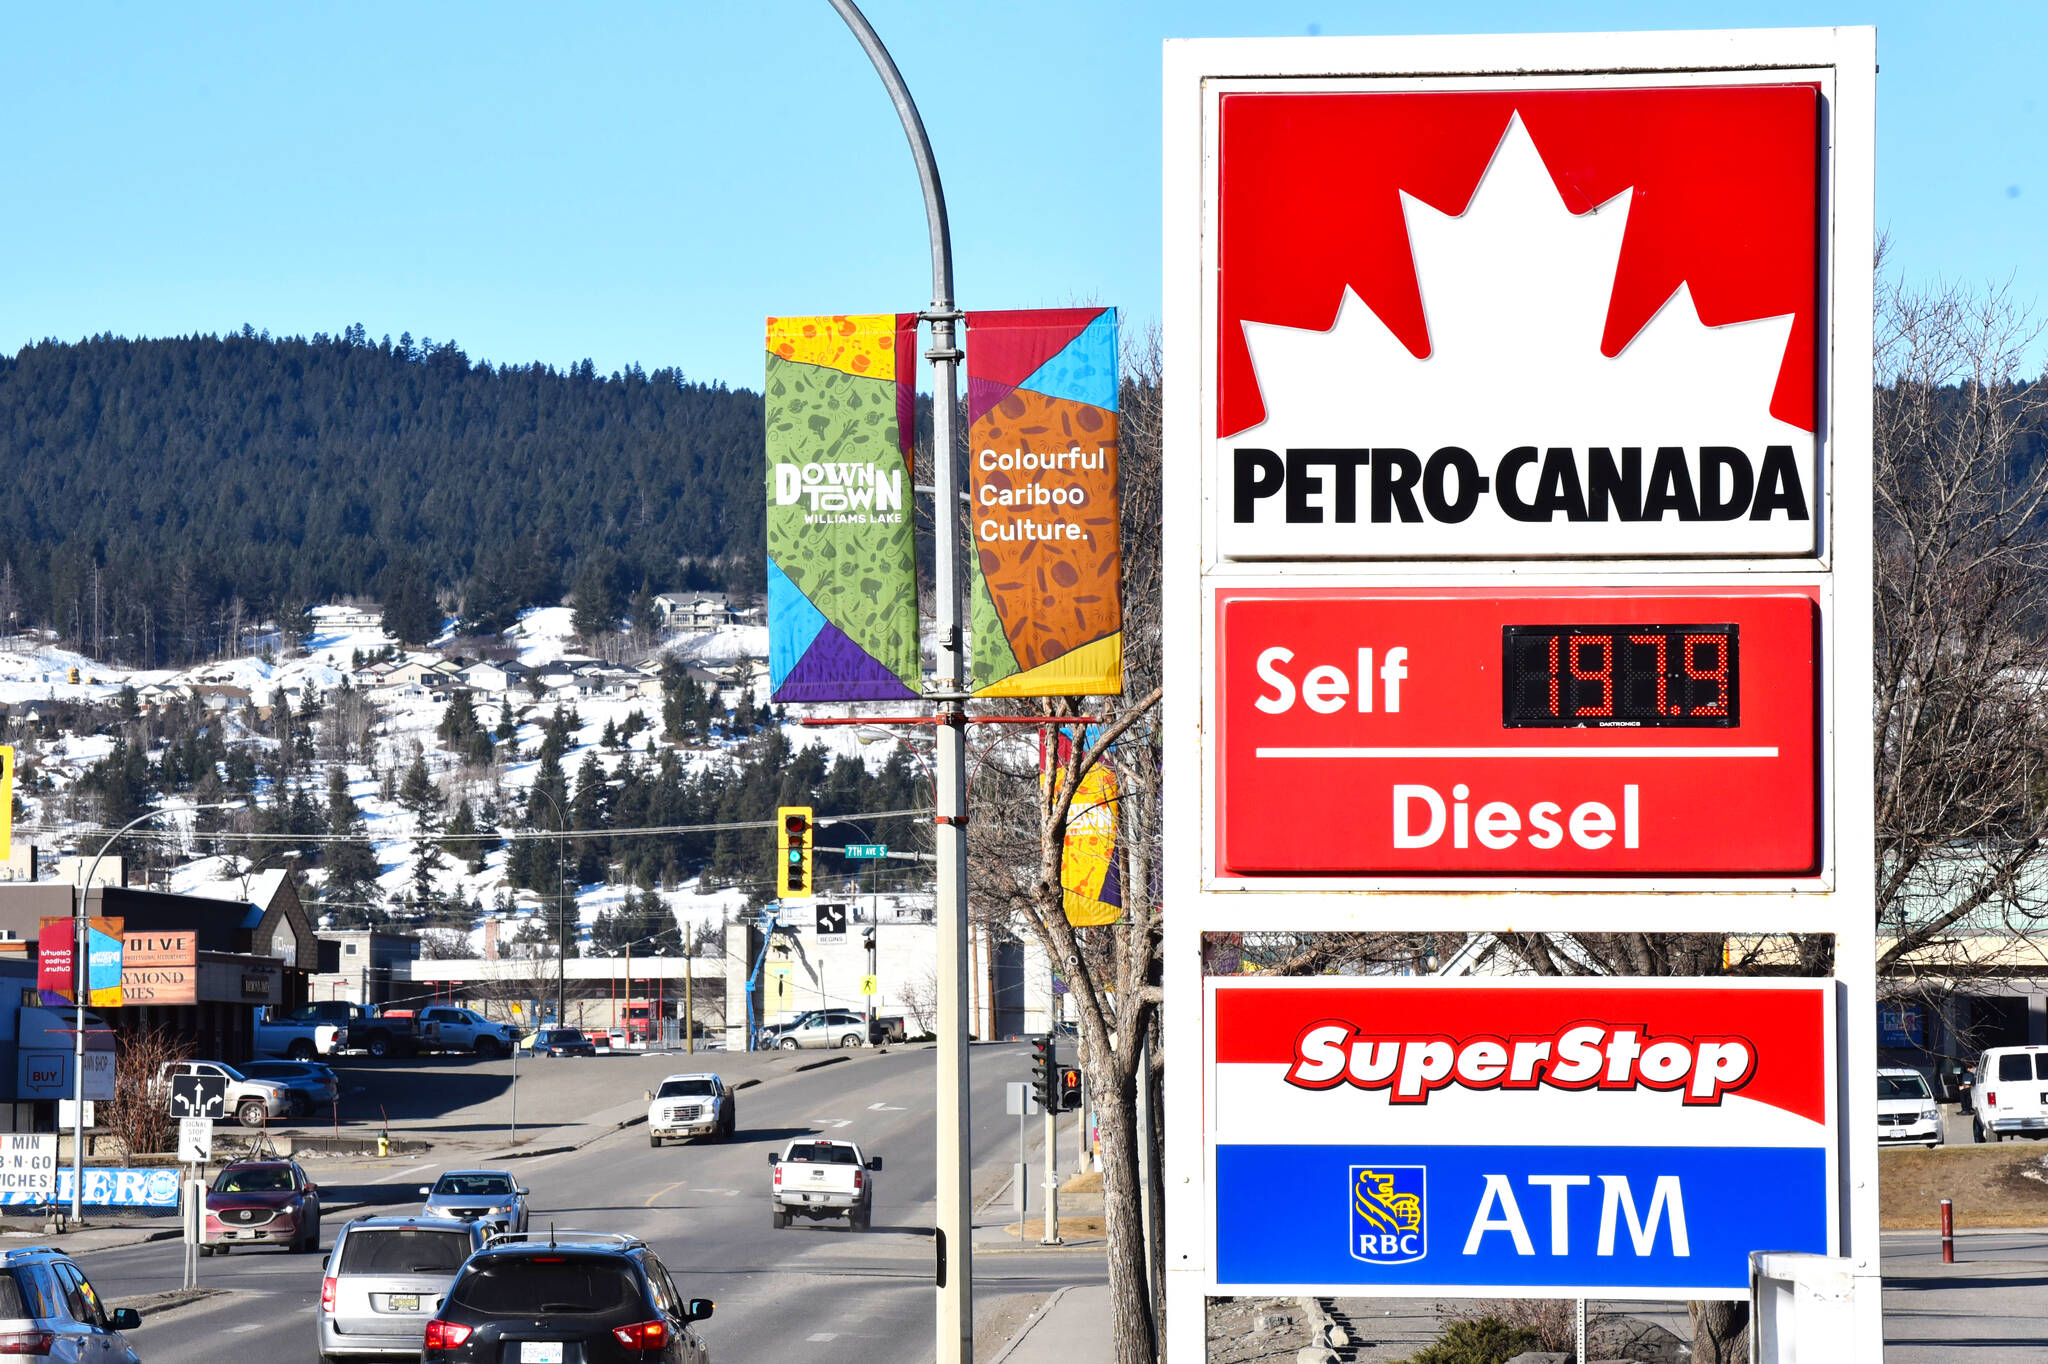 The sting of soaring gas prices is being felt across the country and right here in Williams Lake, with the latest increase Monday evening (March 7) setting the price of regular gasoline at $1.97.9. Vancouver is currently experiencing some of the highest gas prices in North America at $2.07.9. The increases are being blamed on the war in Ukraine as many countries around the world, including Canada and the U.S., stop importing gas from Russia. (Angie Mindus photo - Williams Lake Tribune)